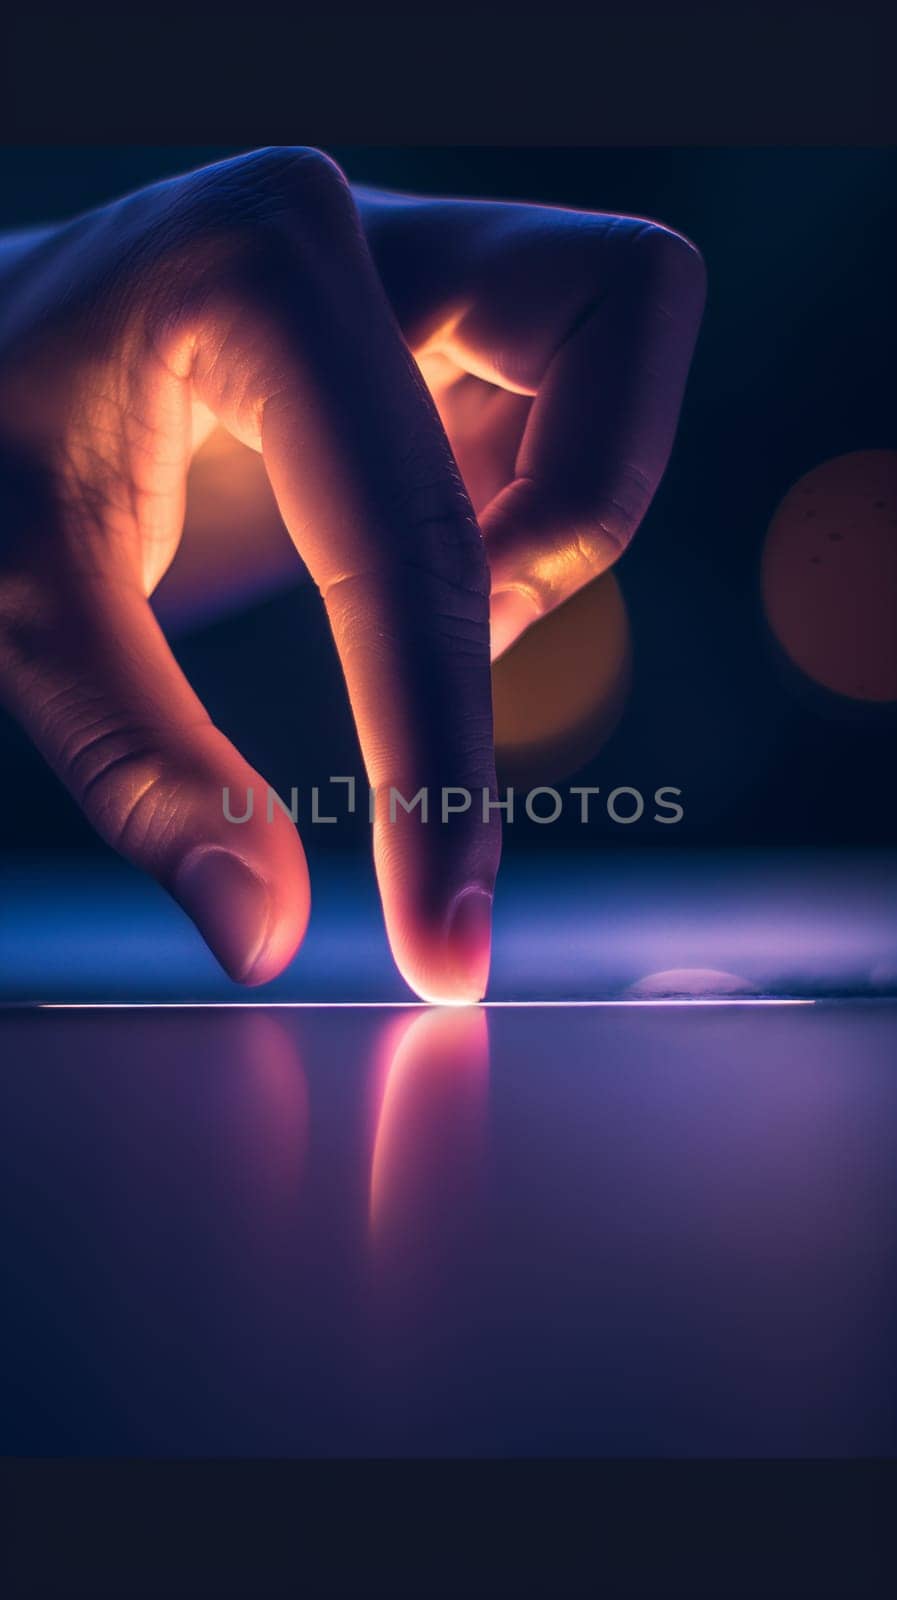 A close-up of a hand interacting with a digital tablets illuminated screen against a dark background with soft bokeh lights - Generative AI